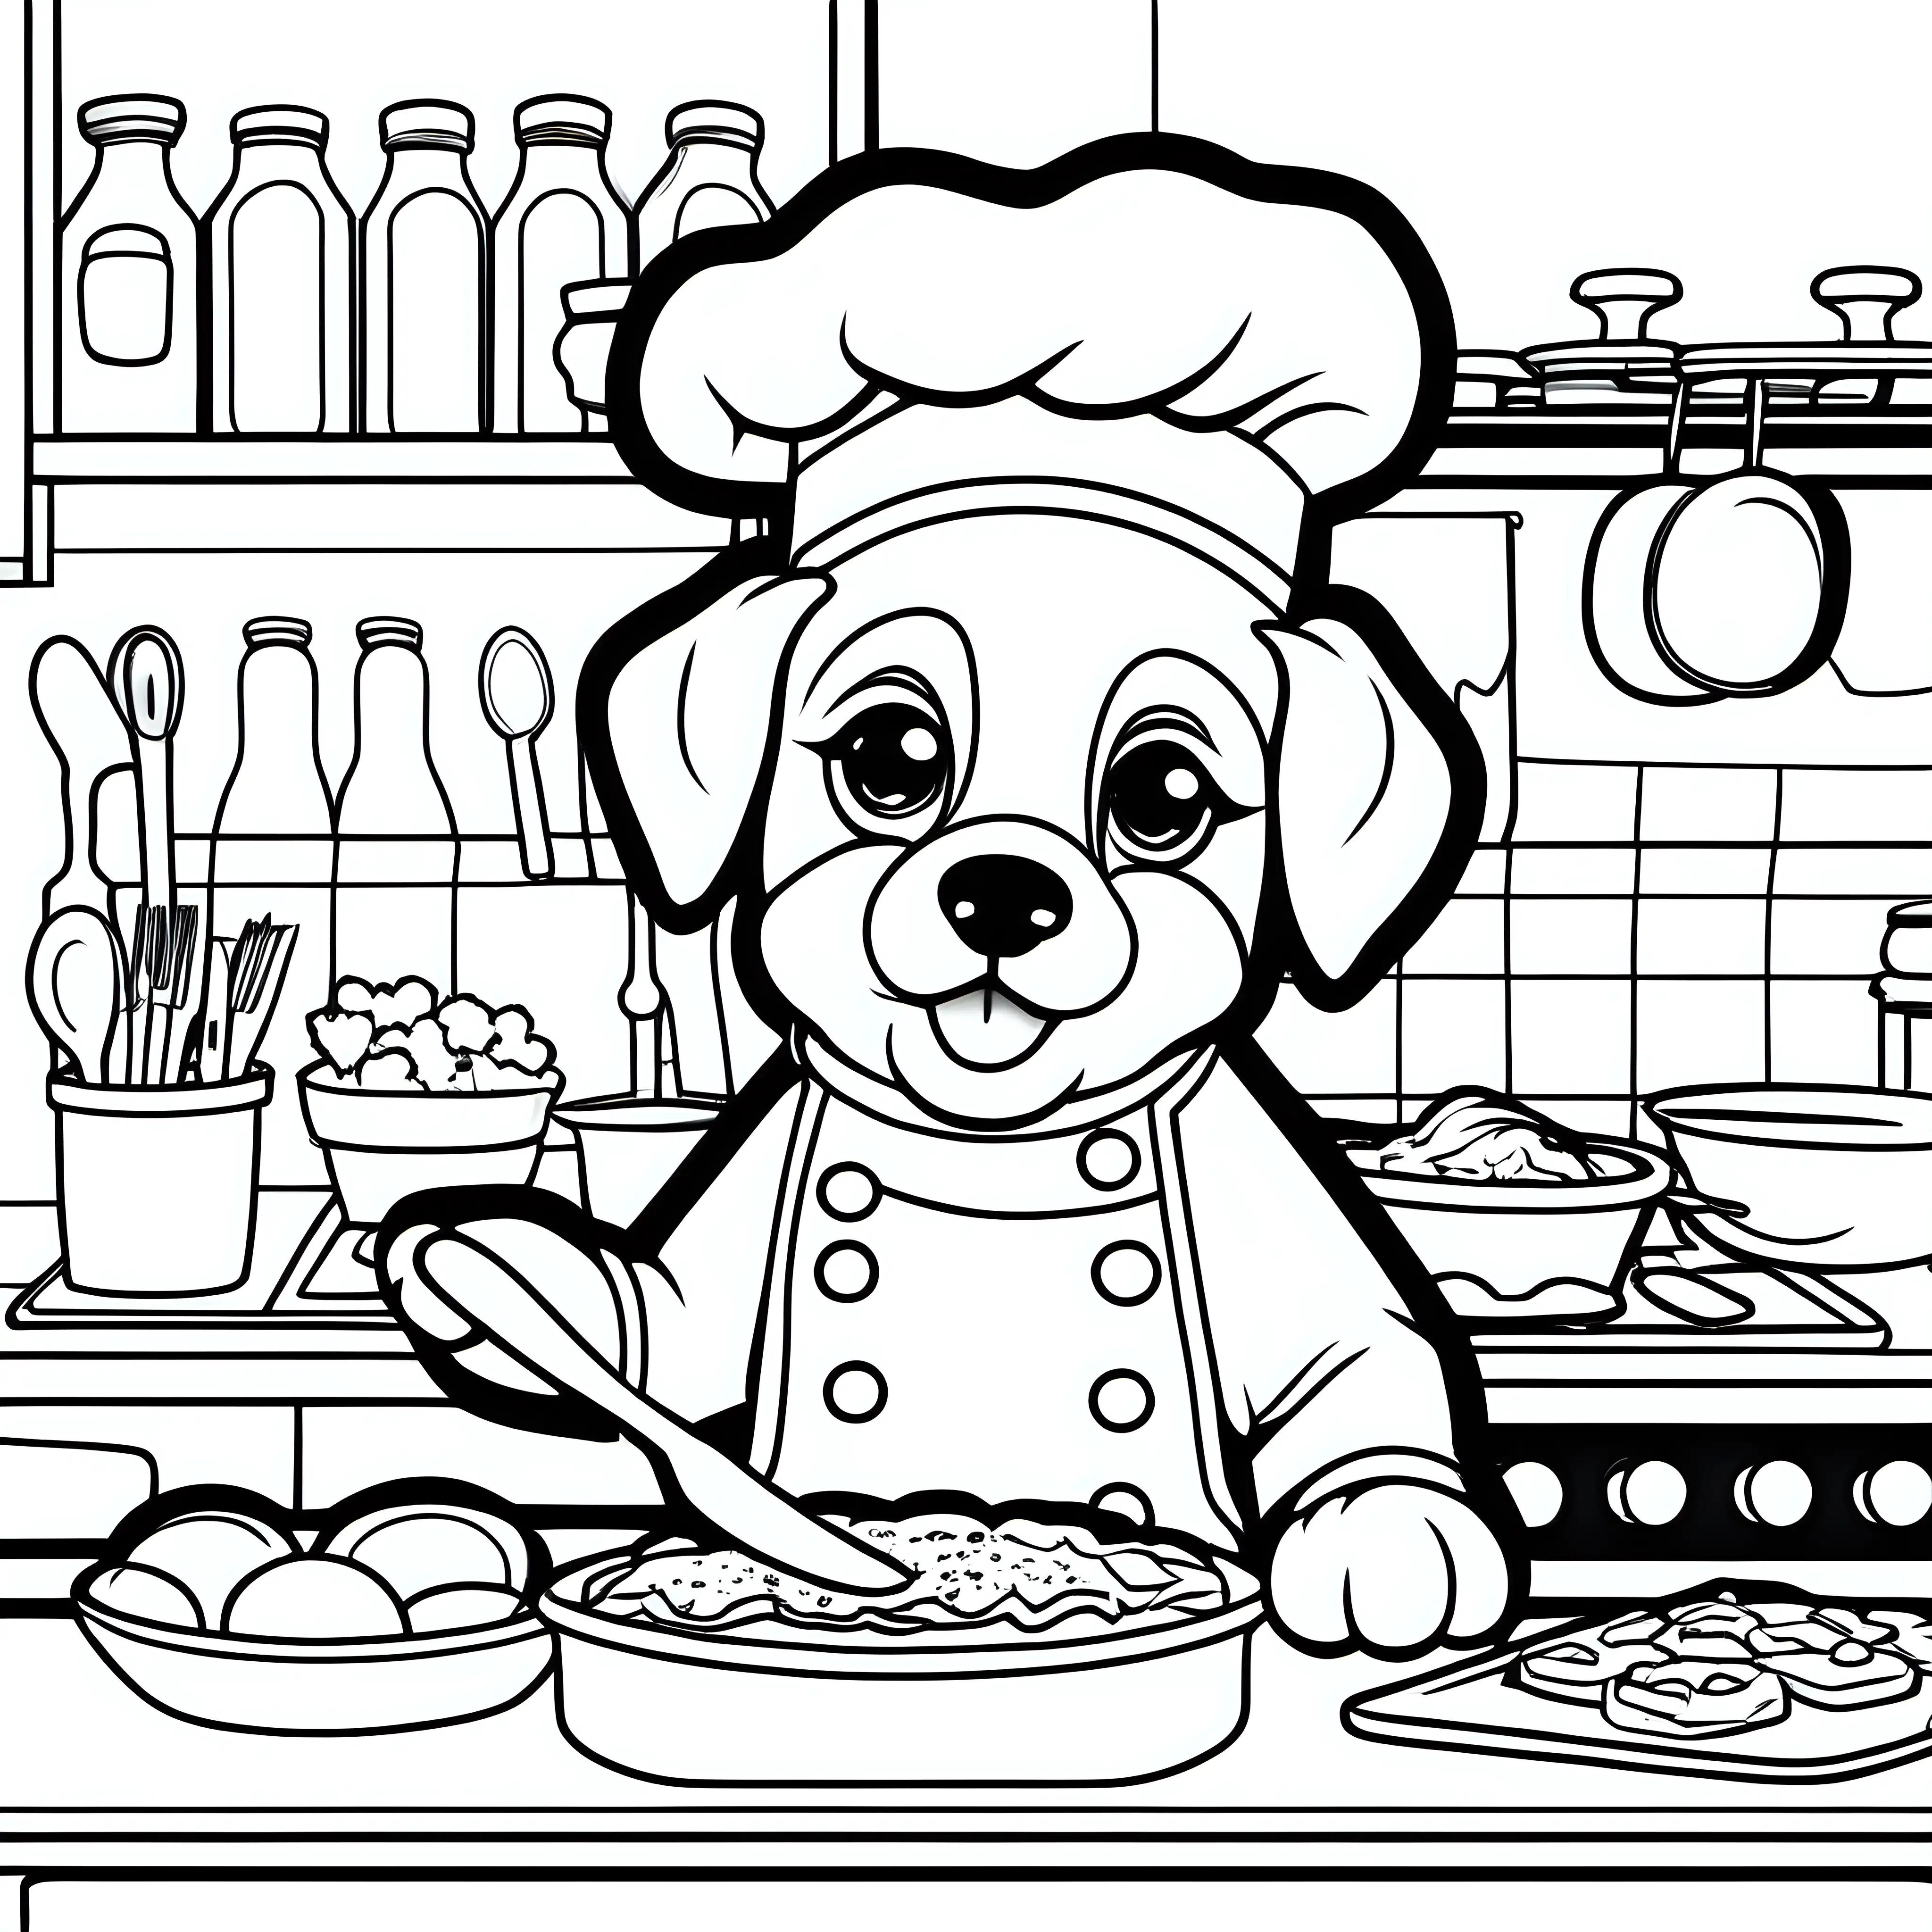 coloring book for kids, simple, adult coloring book, no detail, outline no color, puppy dog chef making breakfast,  fill frame, edge to edge, clipart white background --ar 17:22